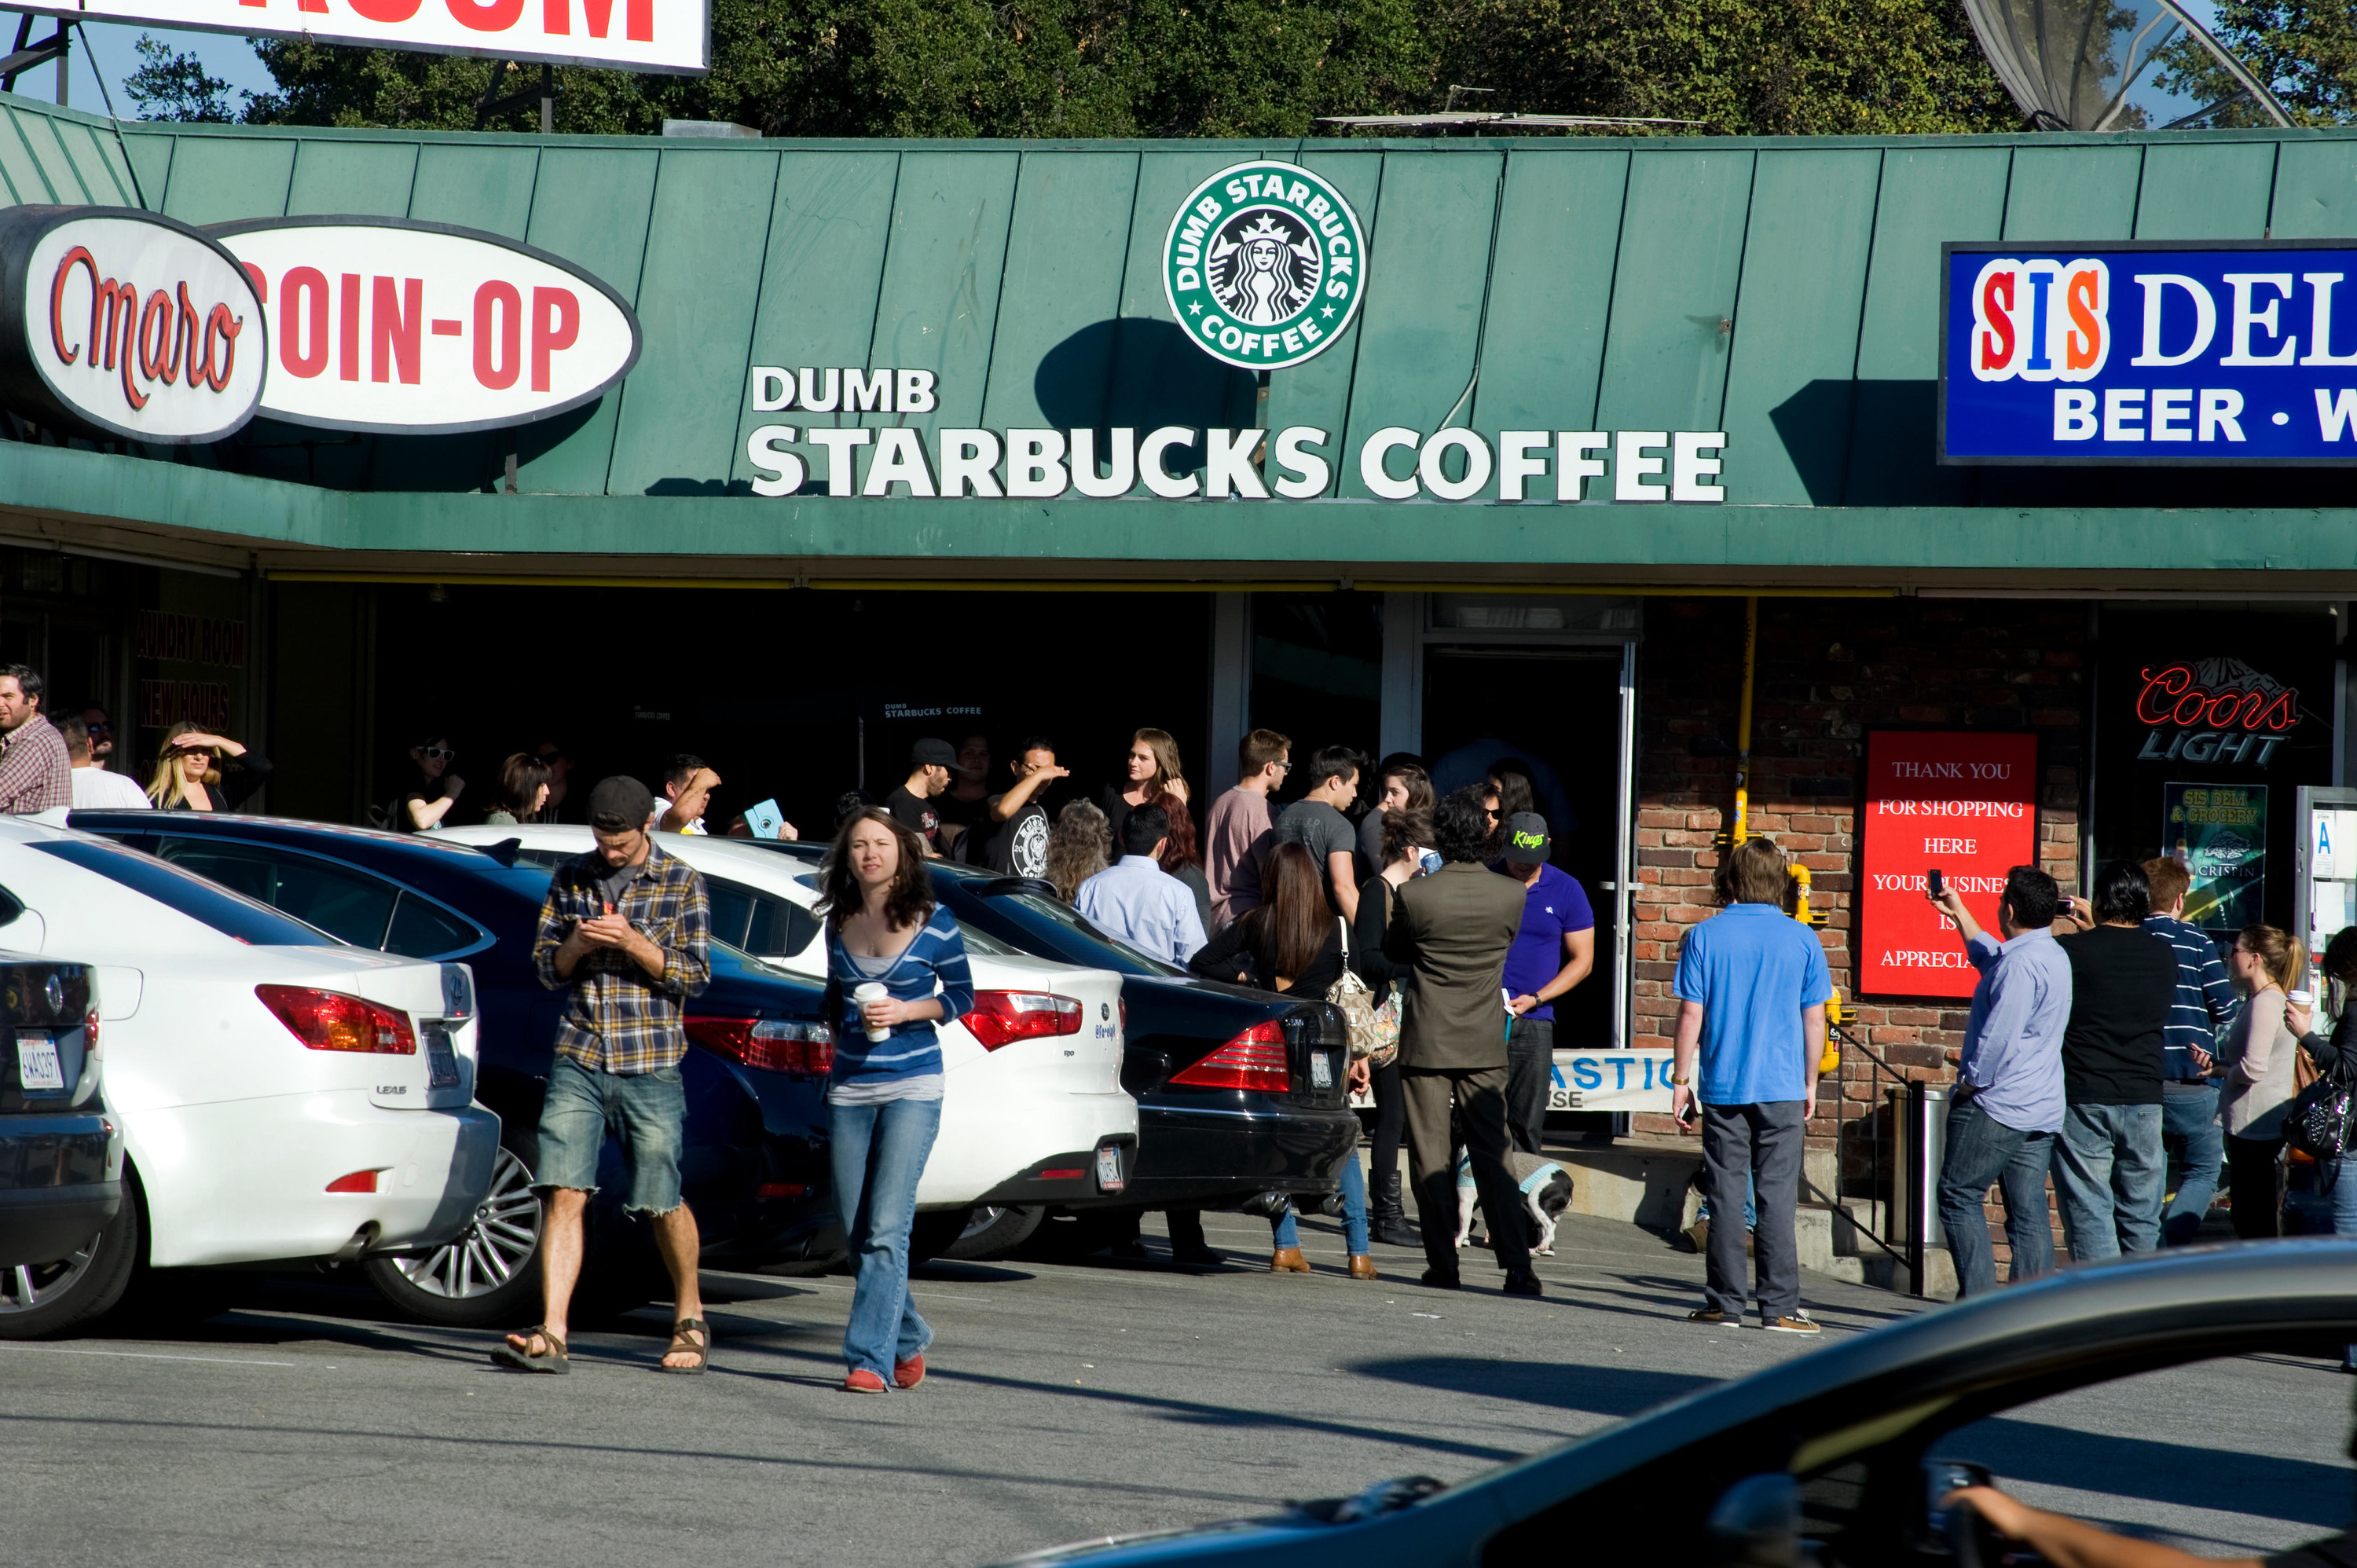 Dumb Starbucks in Los Angeles, California draws a crowd out for free coffee.